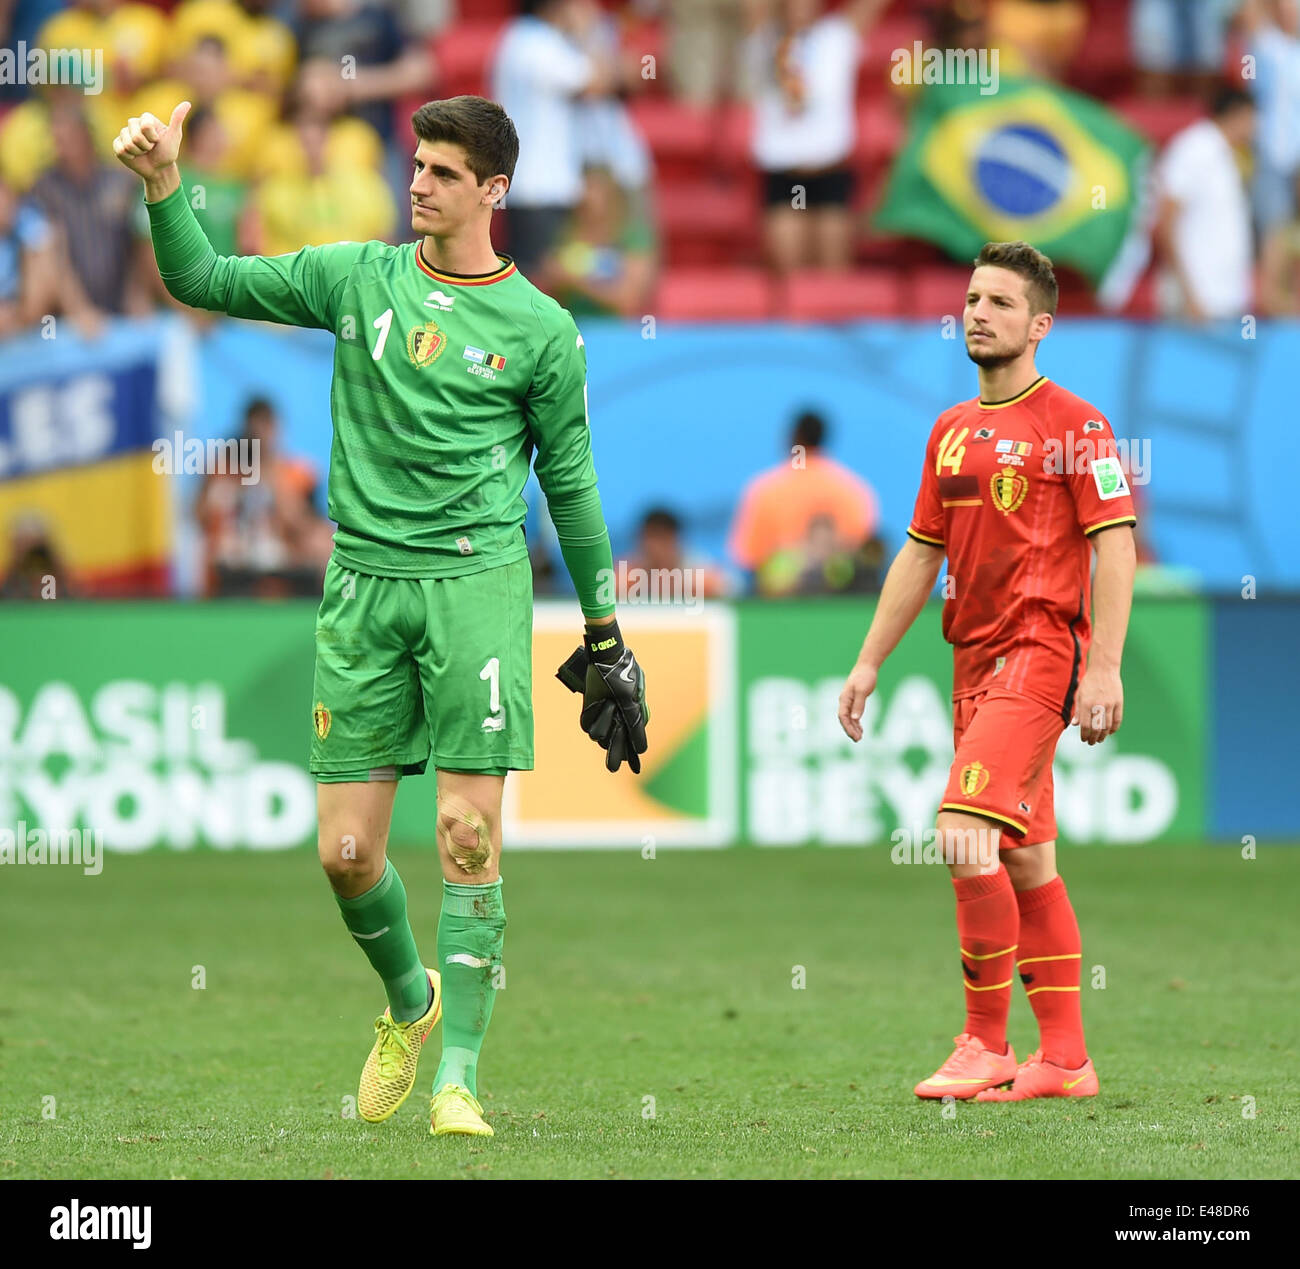 Brasilia, Brazil. 5th July, 2014. Belgium's goalkeeper Thibaut Courtois (L) and Dries Mertens react after a quarter-finals match between Argentina and Belgium of 2014 FIFA World Cup at the Estadio Nacional Stadium in Brasilia, Brazil, on July 5, 2014. Argentina won 1-0 over Belgium and qualified for the semi-finals. Credit:  Liu Dawei/Xinhua/Alamy Live News Stock Photo